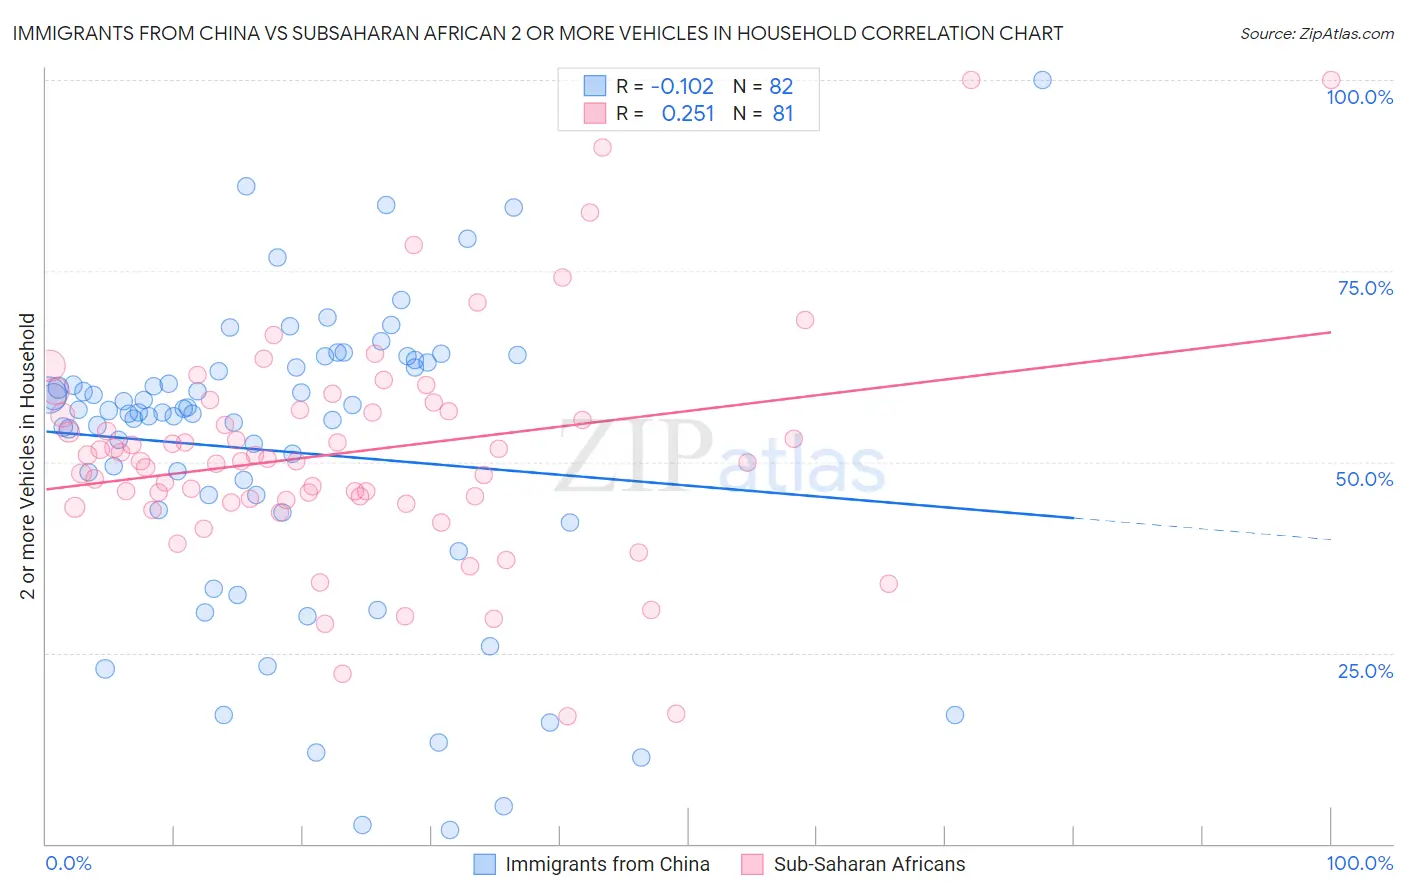 Immigrants from China vs Subsaharan African 2 or more Vehicles in Household